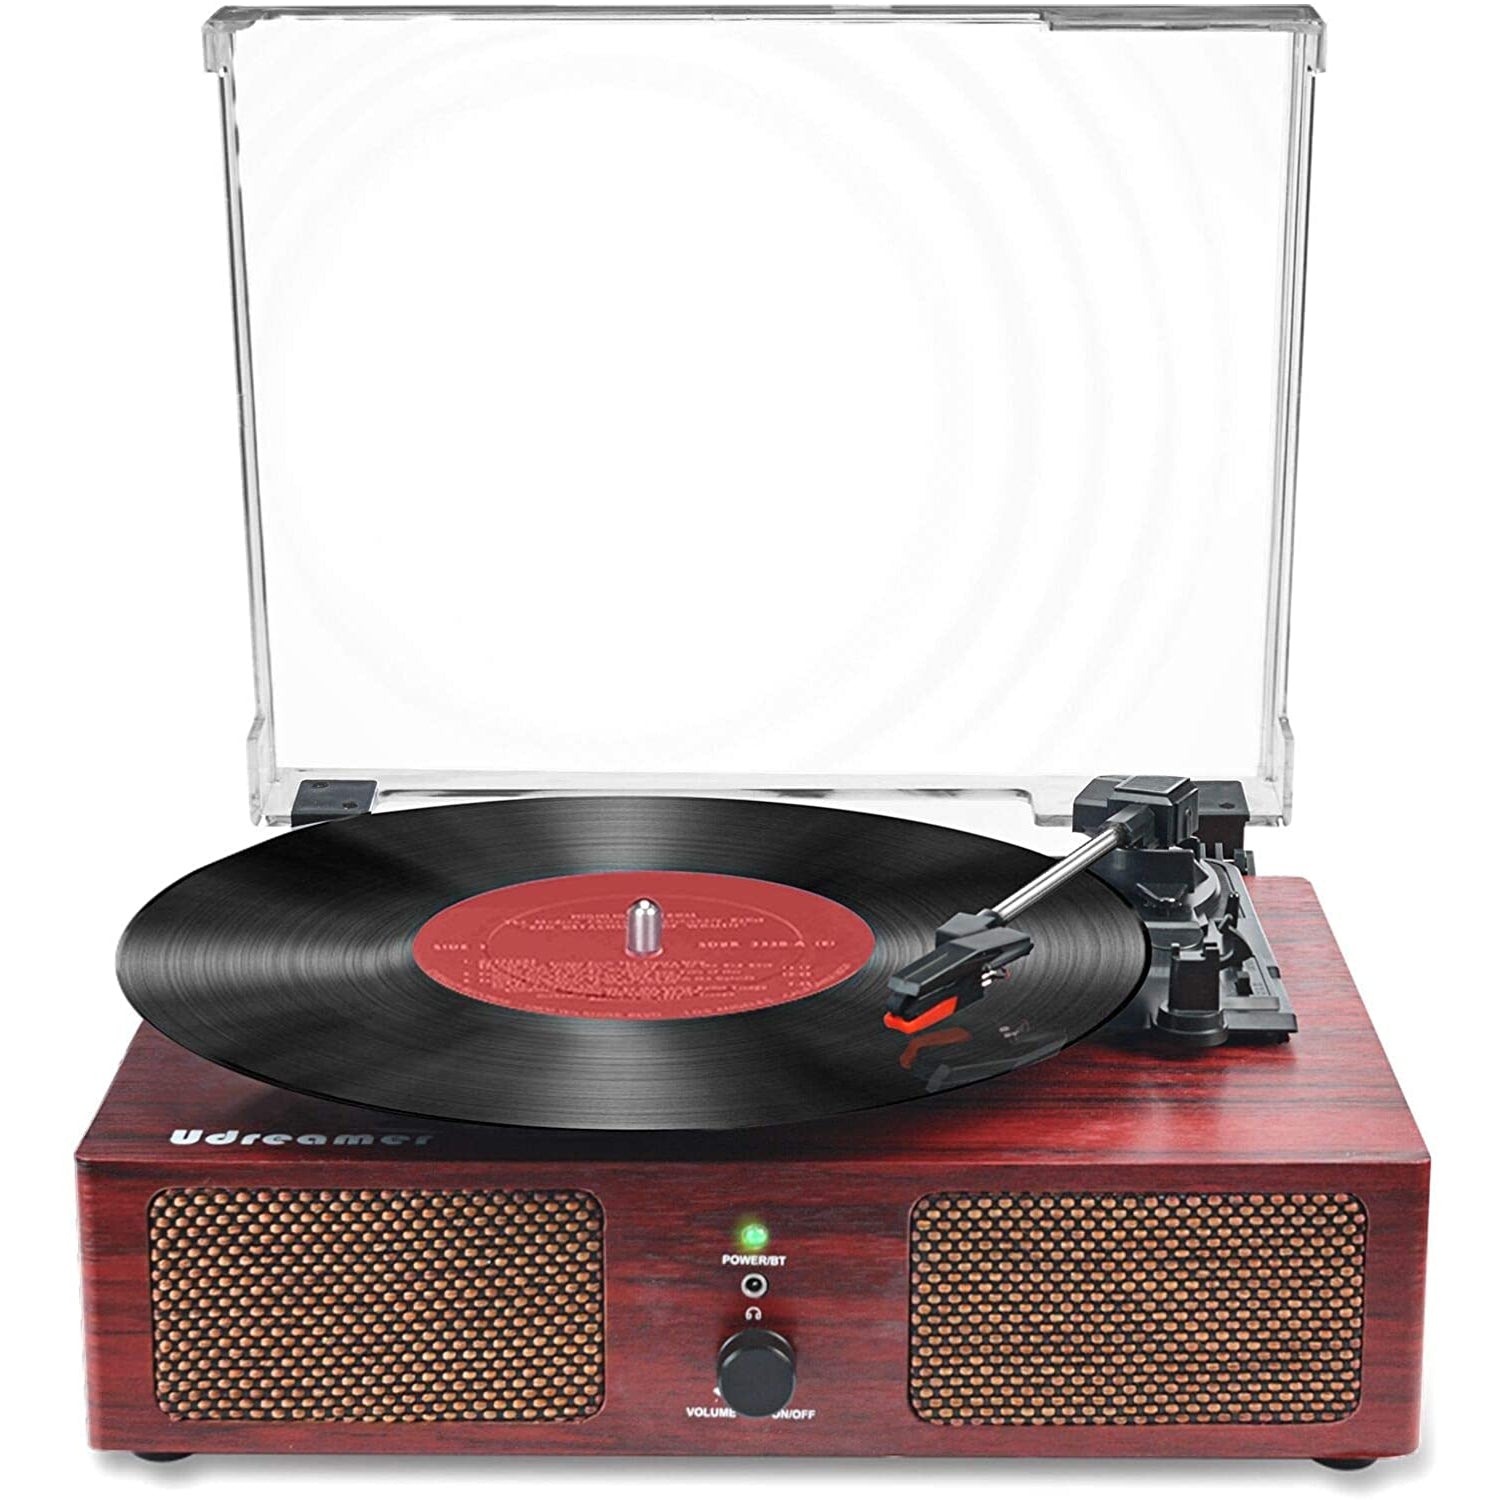 Udreamer Vinyl Record Player Bluetooth Turntable - Brown / Claret